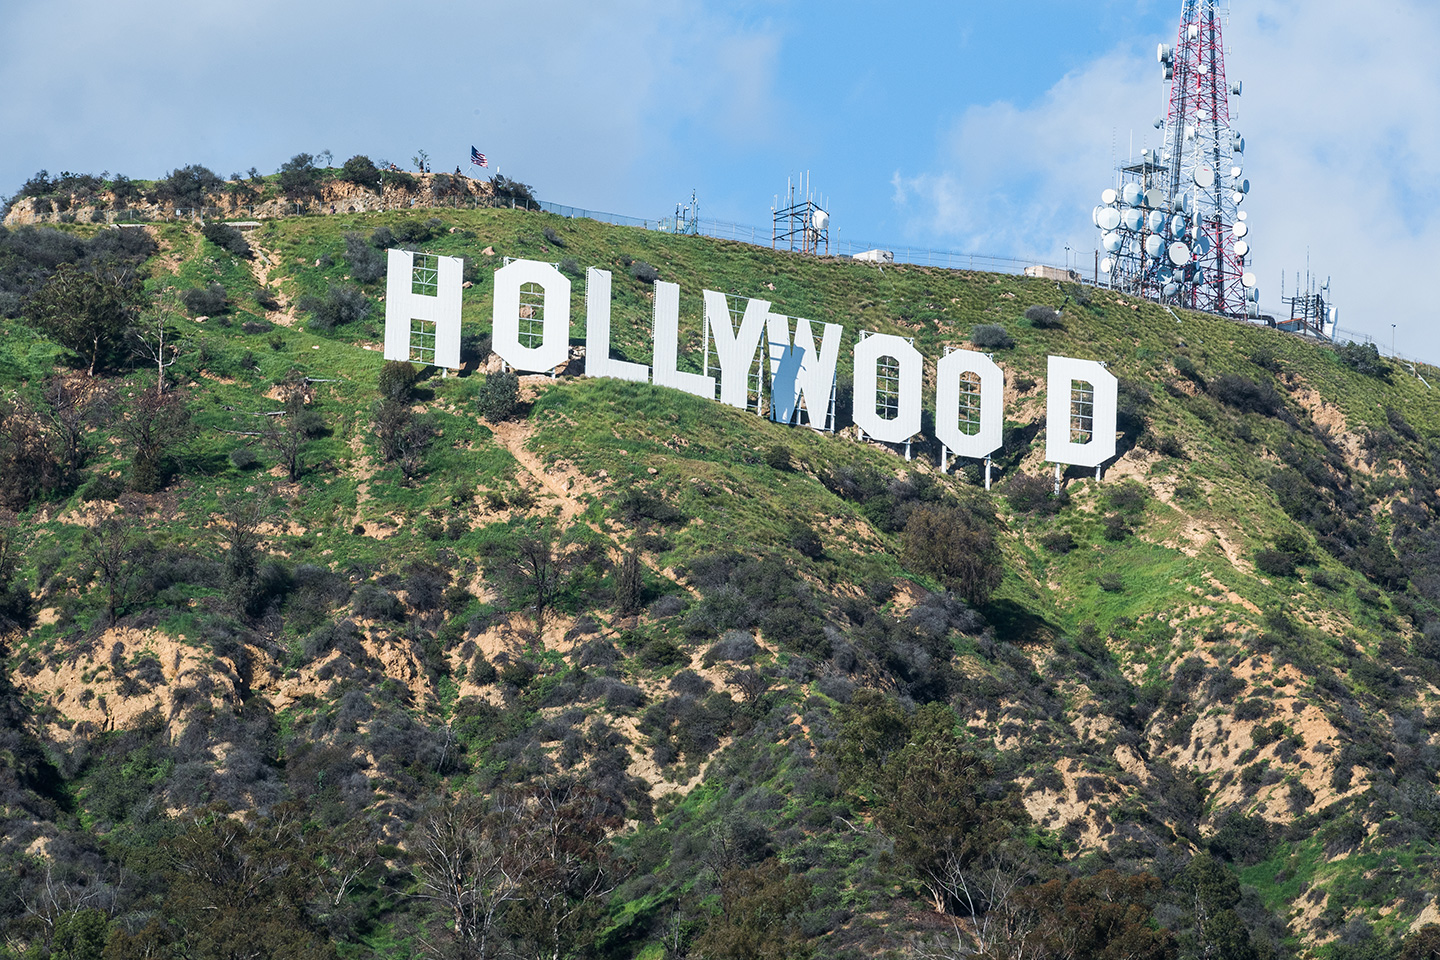 Top 10 Intriguing Facts About Hollywood - The Crazy Facts